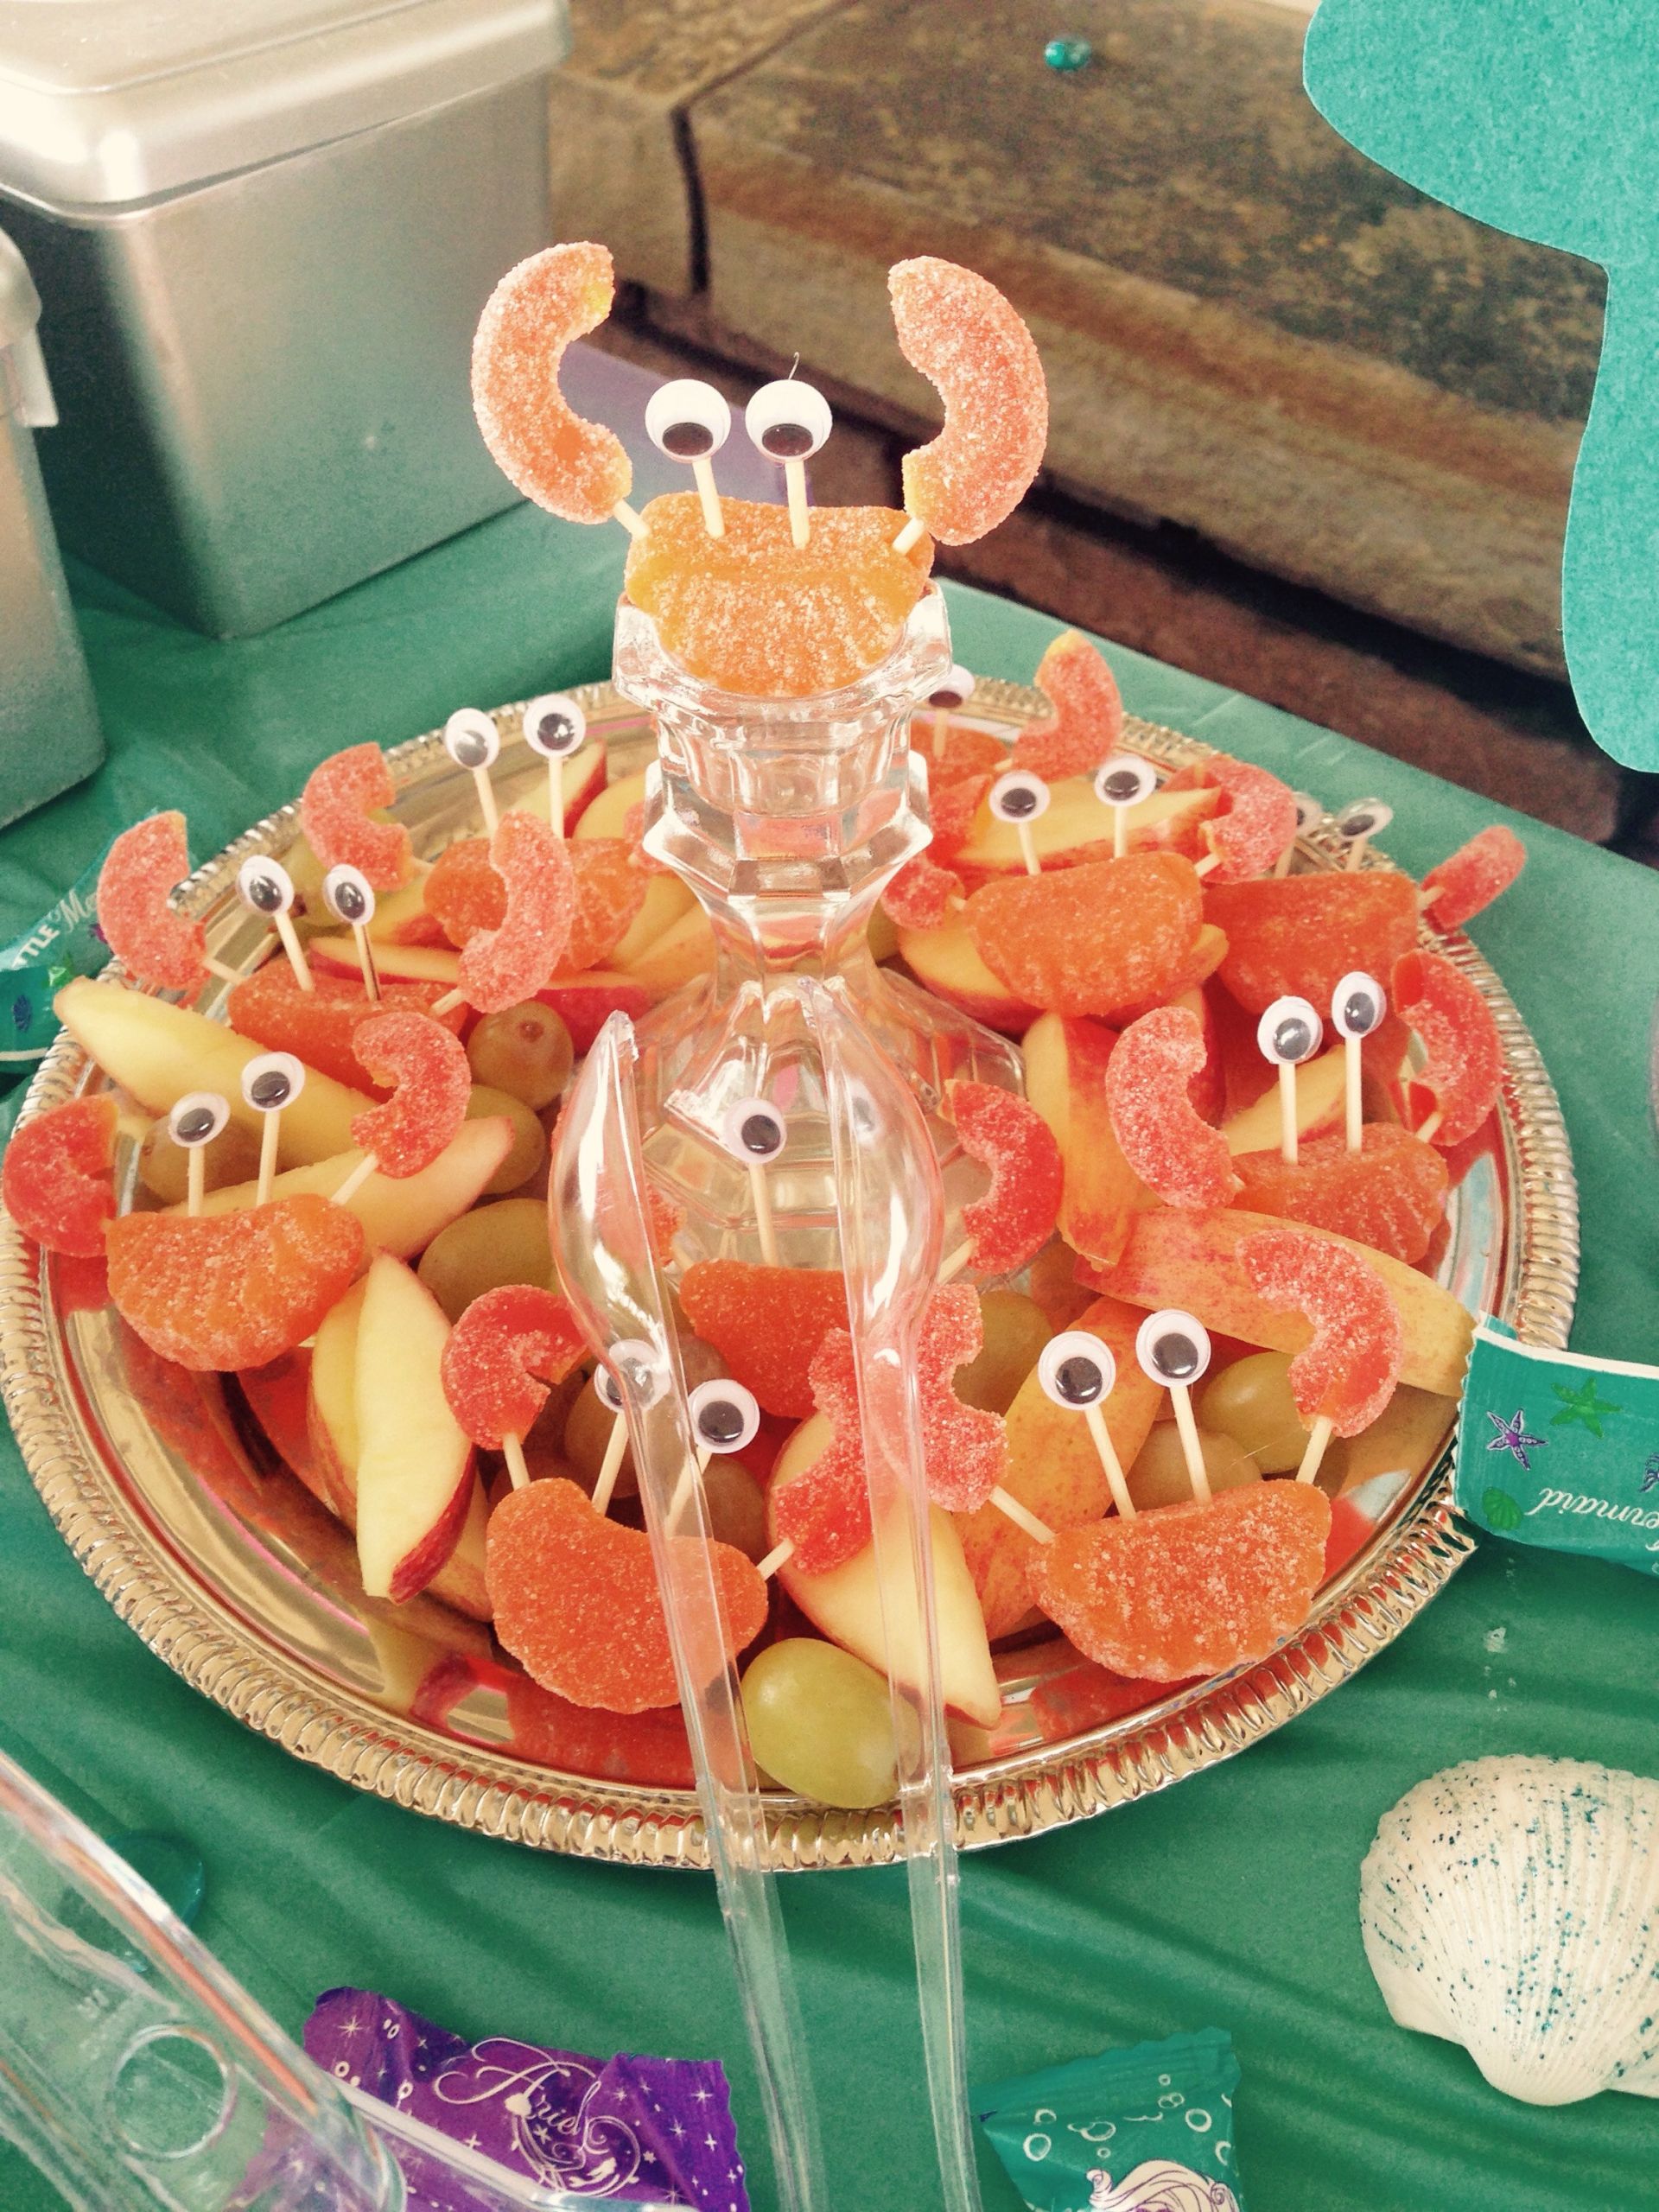 Little Mermaid Party Snack Ideas
 The Little Mermaid themed Birthday Party